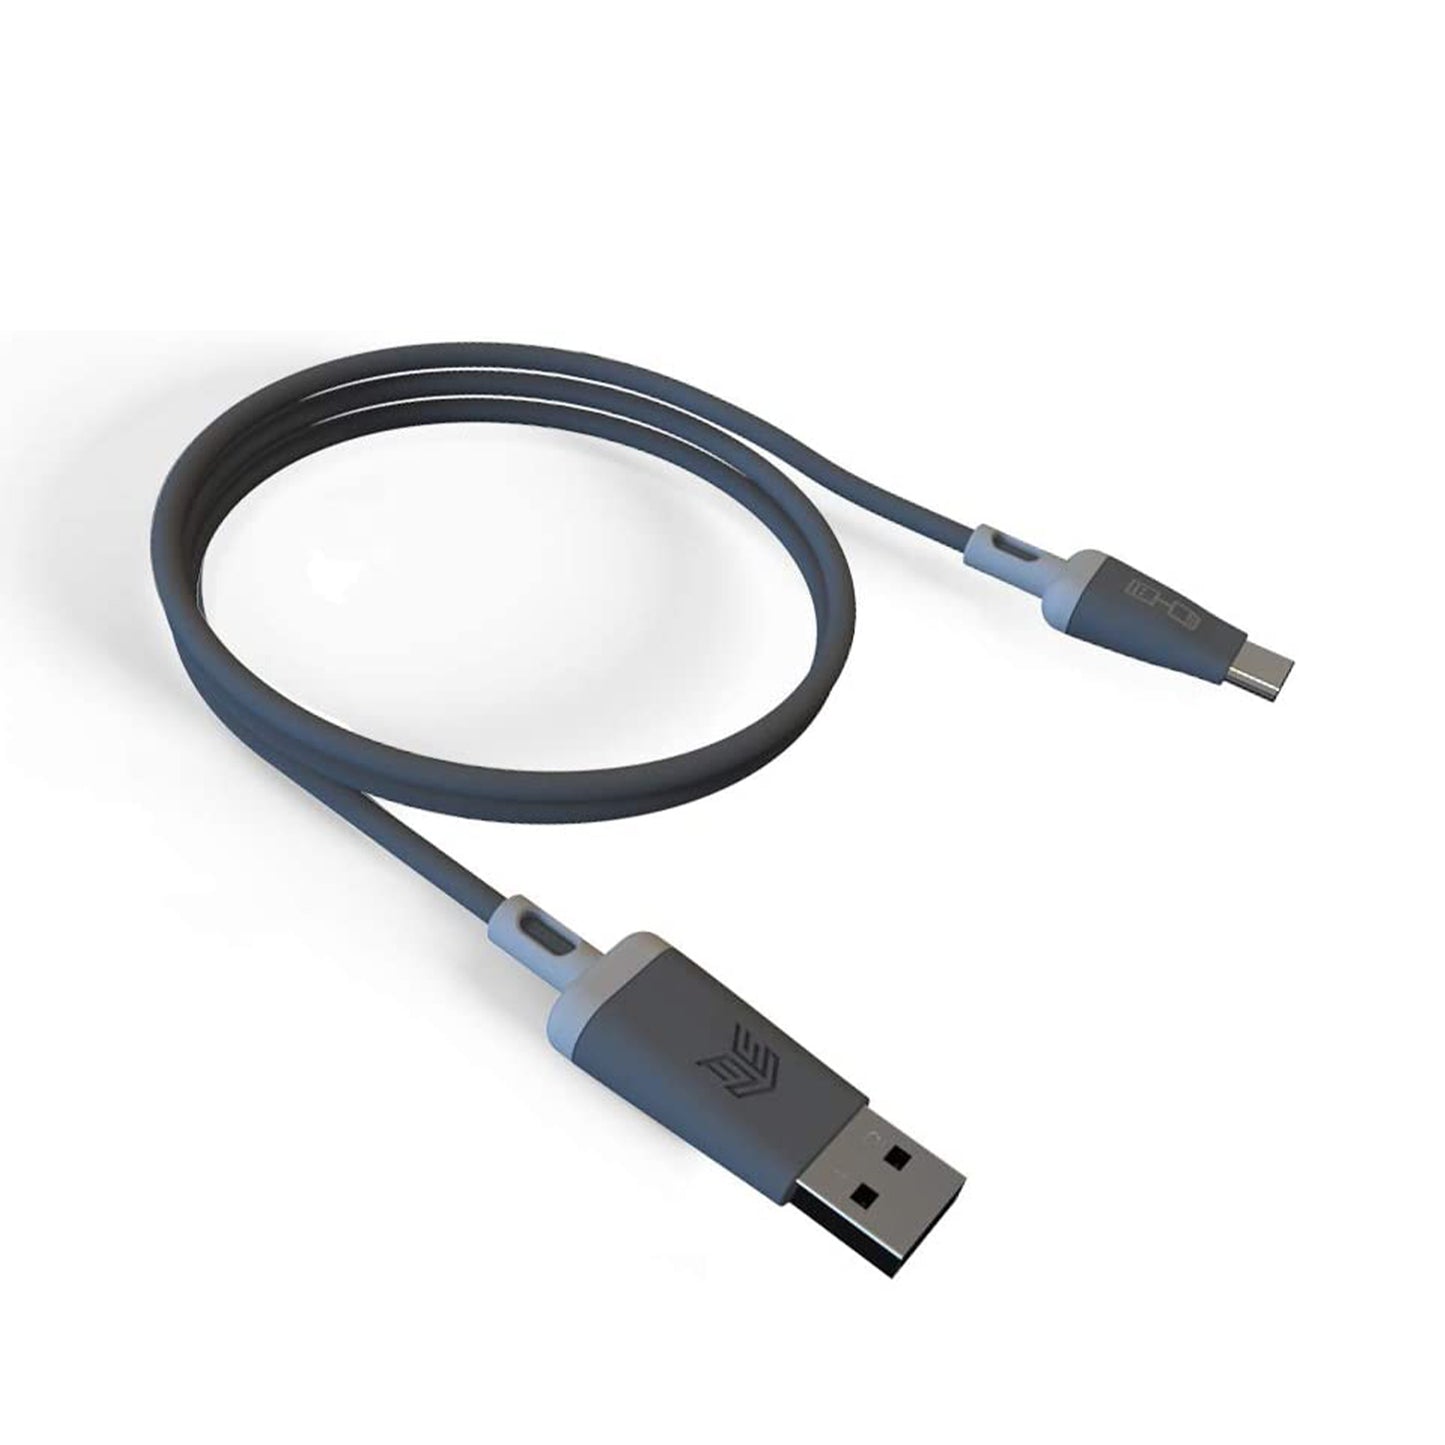 STM Able Cable USB-C to USB-A cable 1.5m - Grey